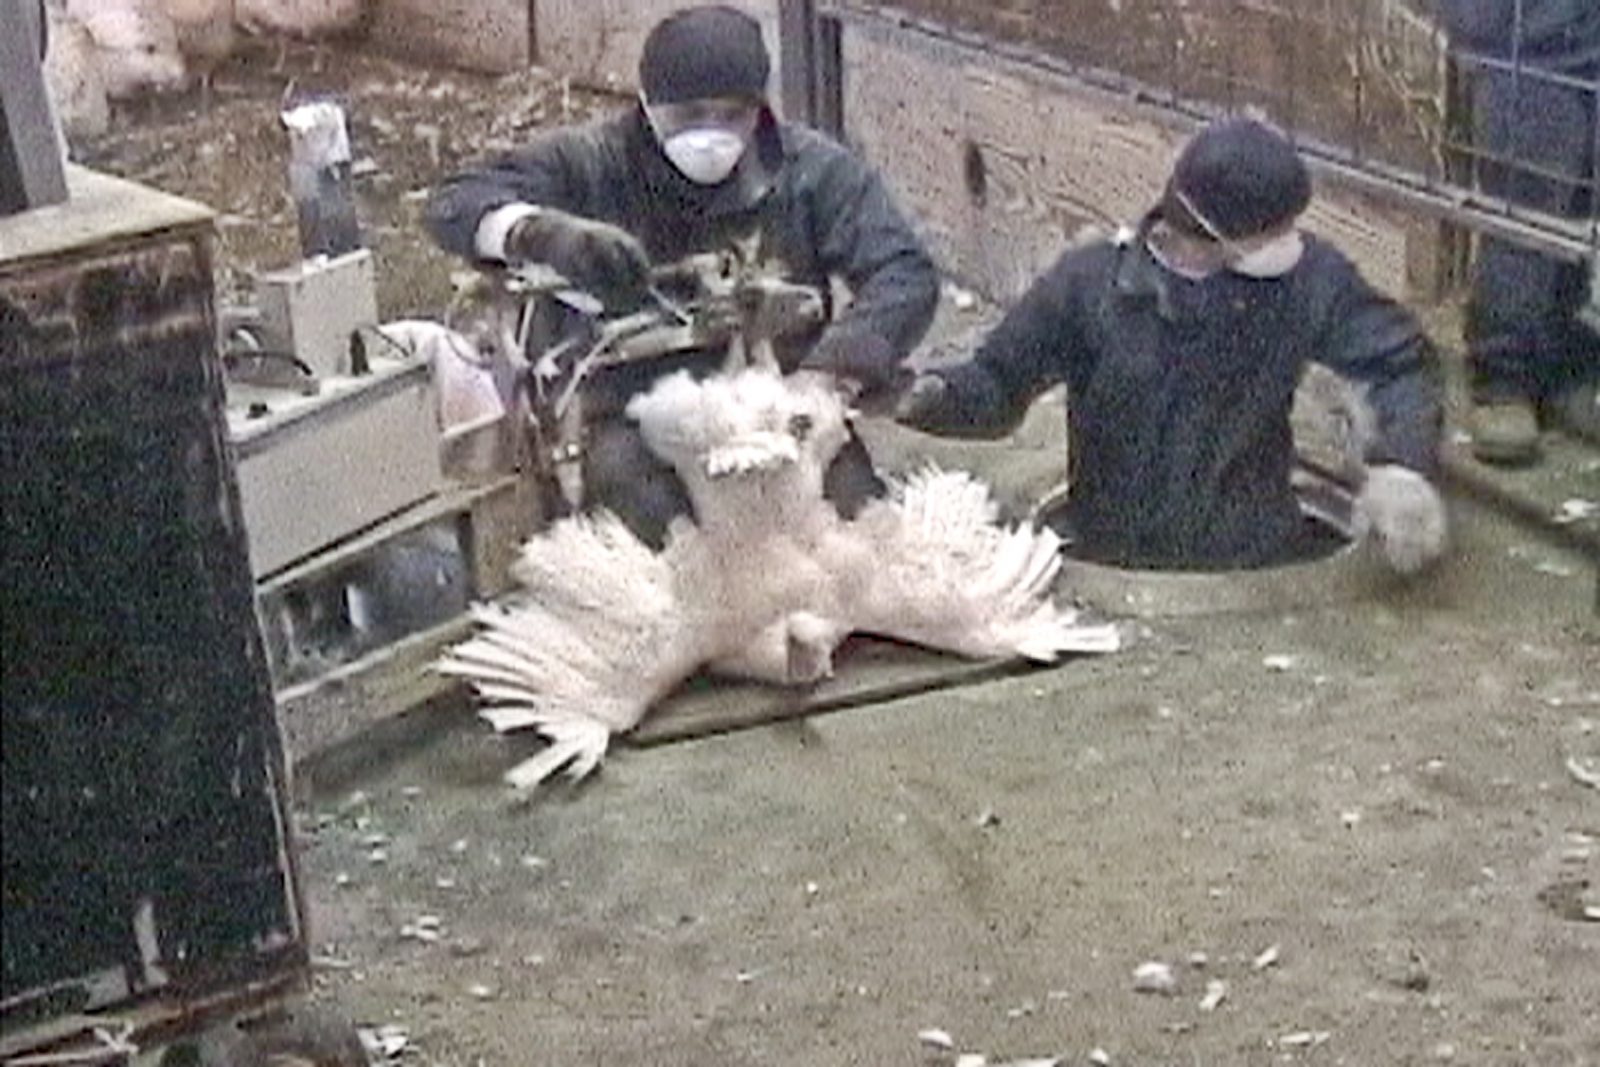 A factory worker artificially inseminating a turkey.